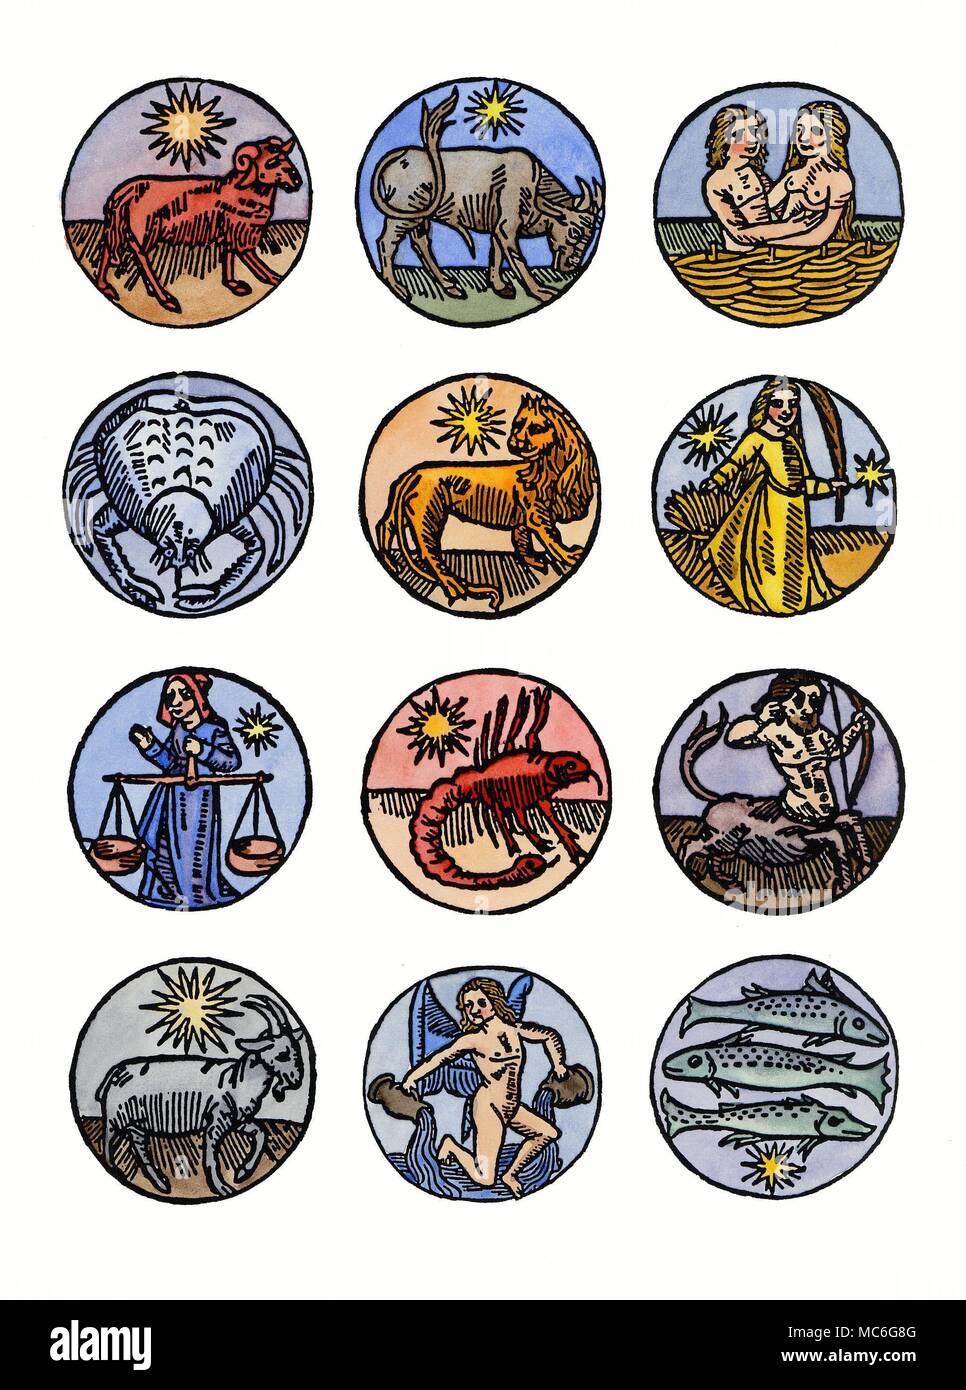 ASTROLOGY - THE TWELVE SIGNS Twelve roundel images of the signs of the zodiac. Reading from the top, left to right, Aries, Taurus, Gemini, Cancer, Leo, Virgo, Libra, Scorpio, Sagittarius, Capricorn, Aquarius and Pisces. From the Nicolas le Rouge edition of Le Grant Kalendrier et compost des bergiers, circa 1500. Stock Photo